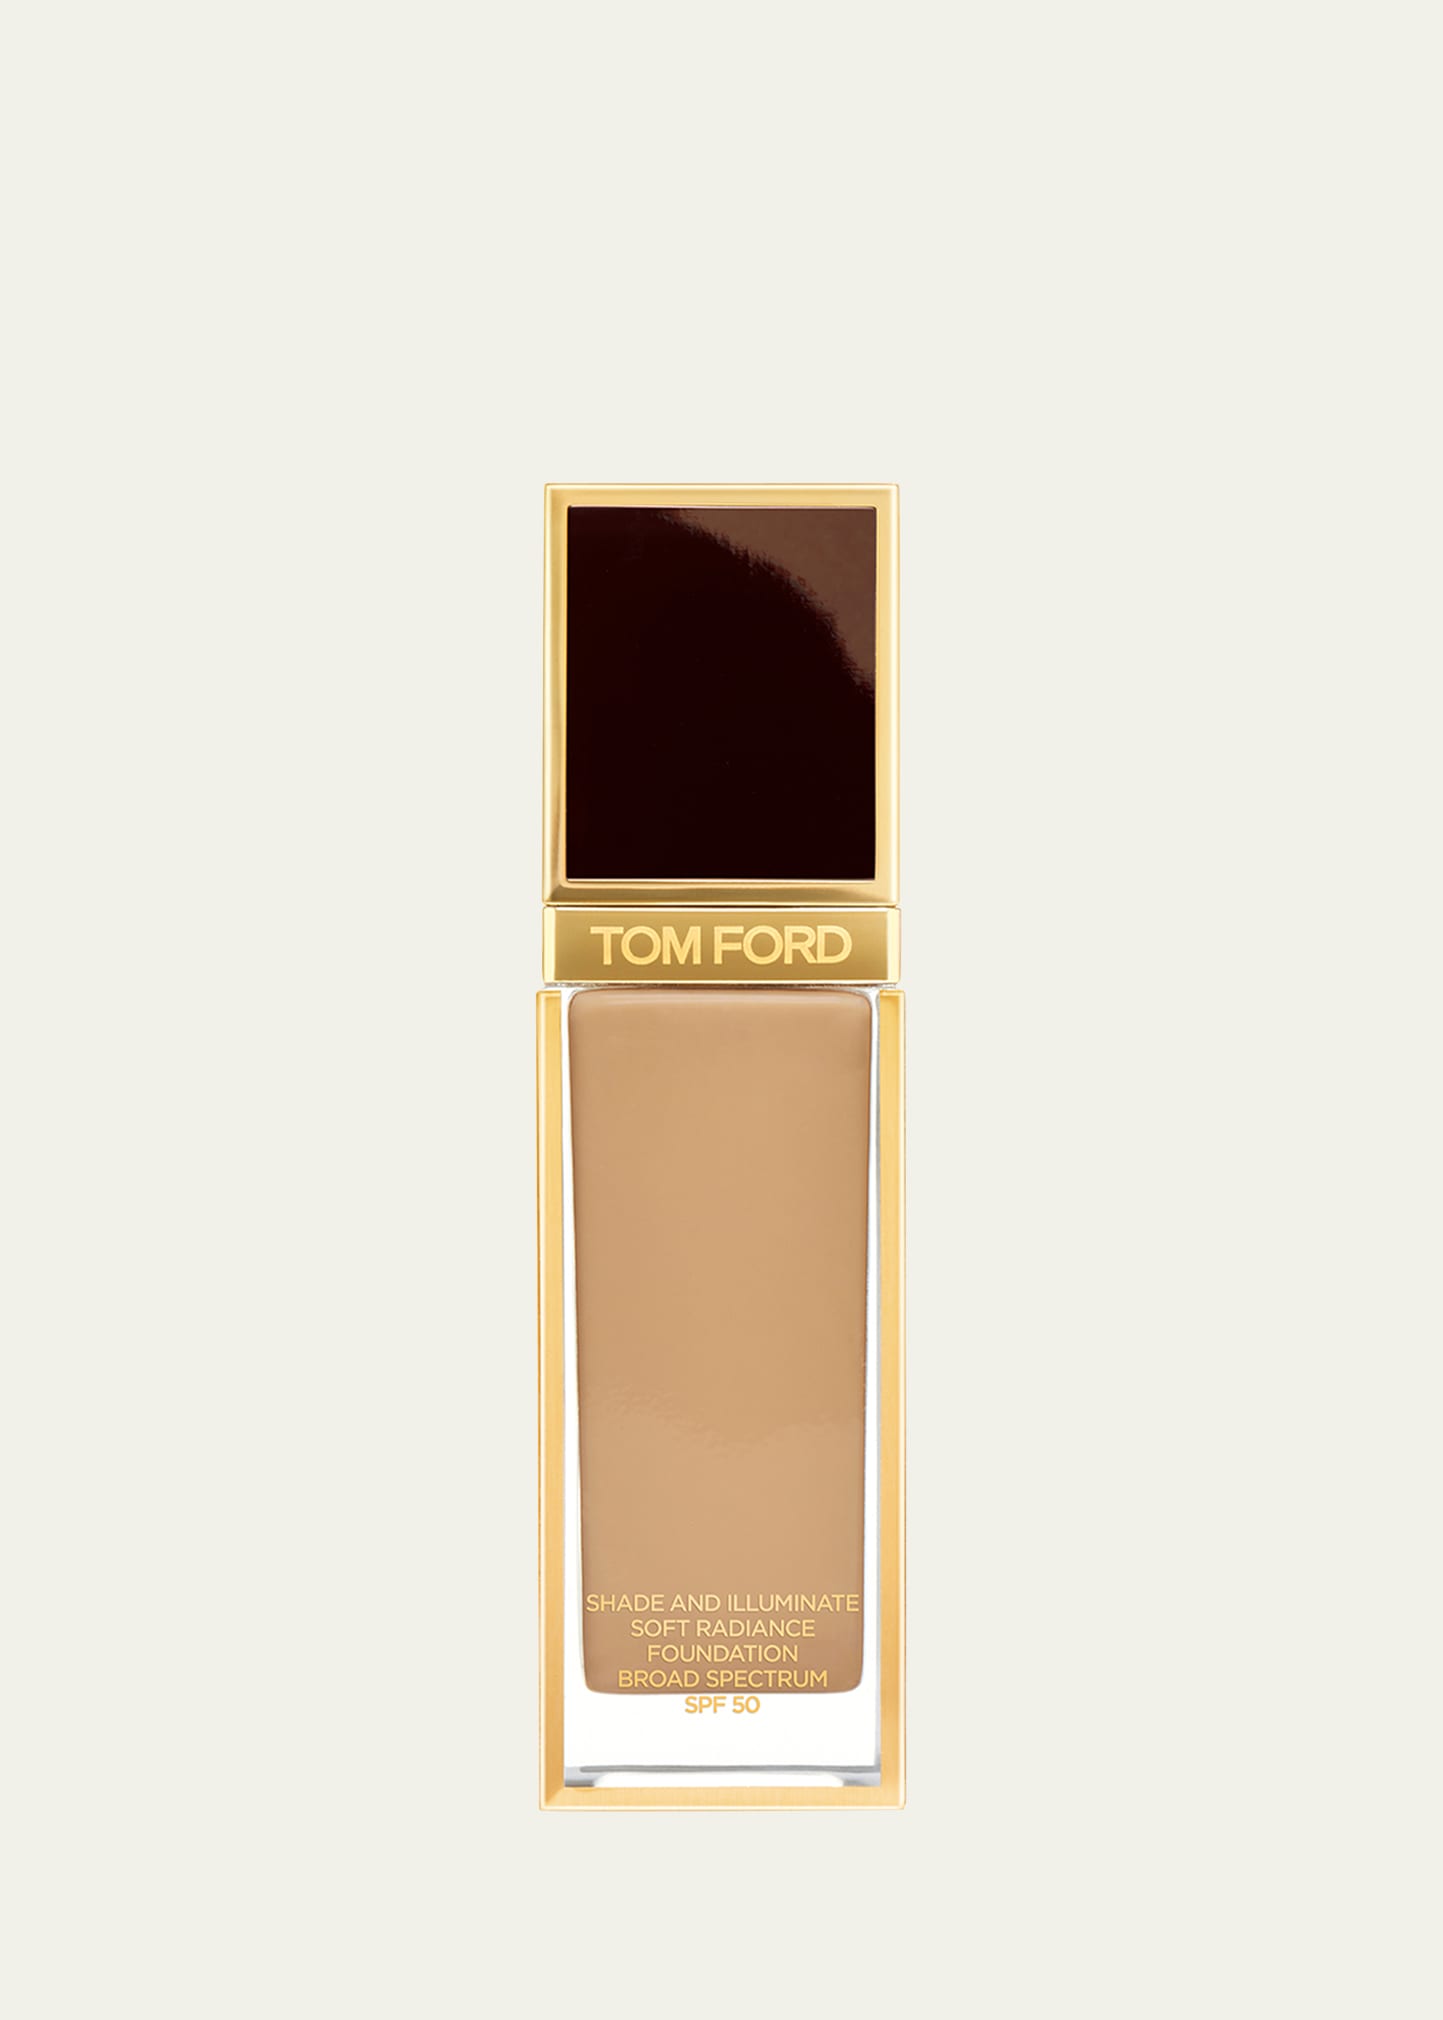 Tom Ford 1 Oz. Shade And Illuminate Soft Radiance Foundation Spf 50 In 8.7 Golden Almond